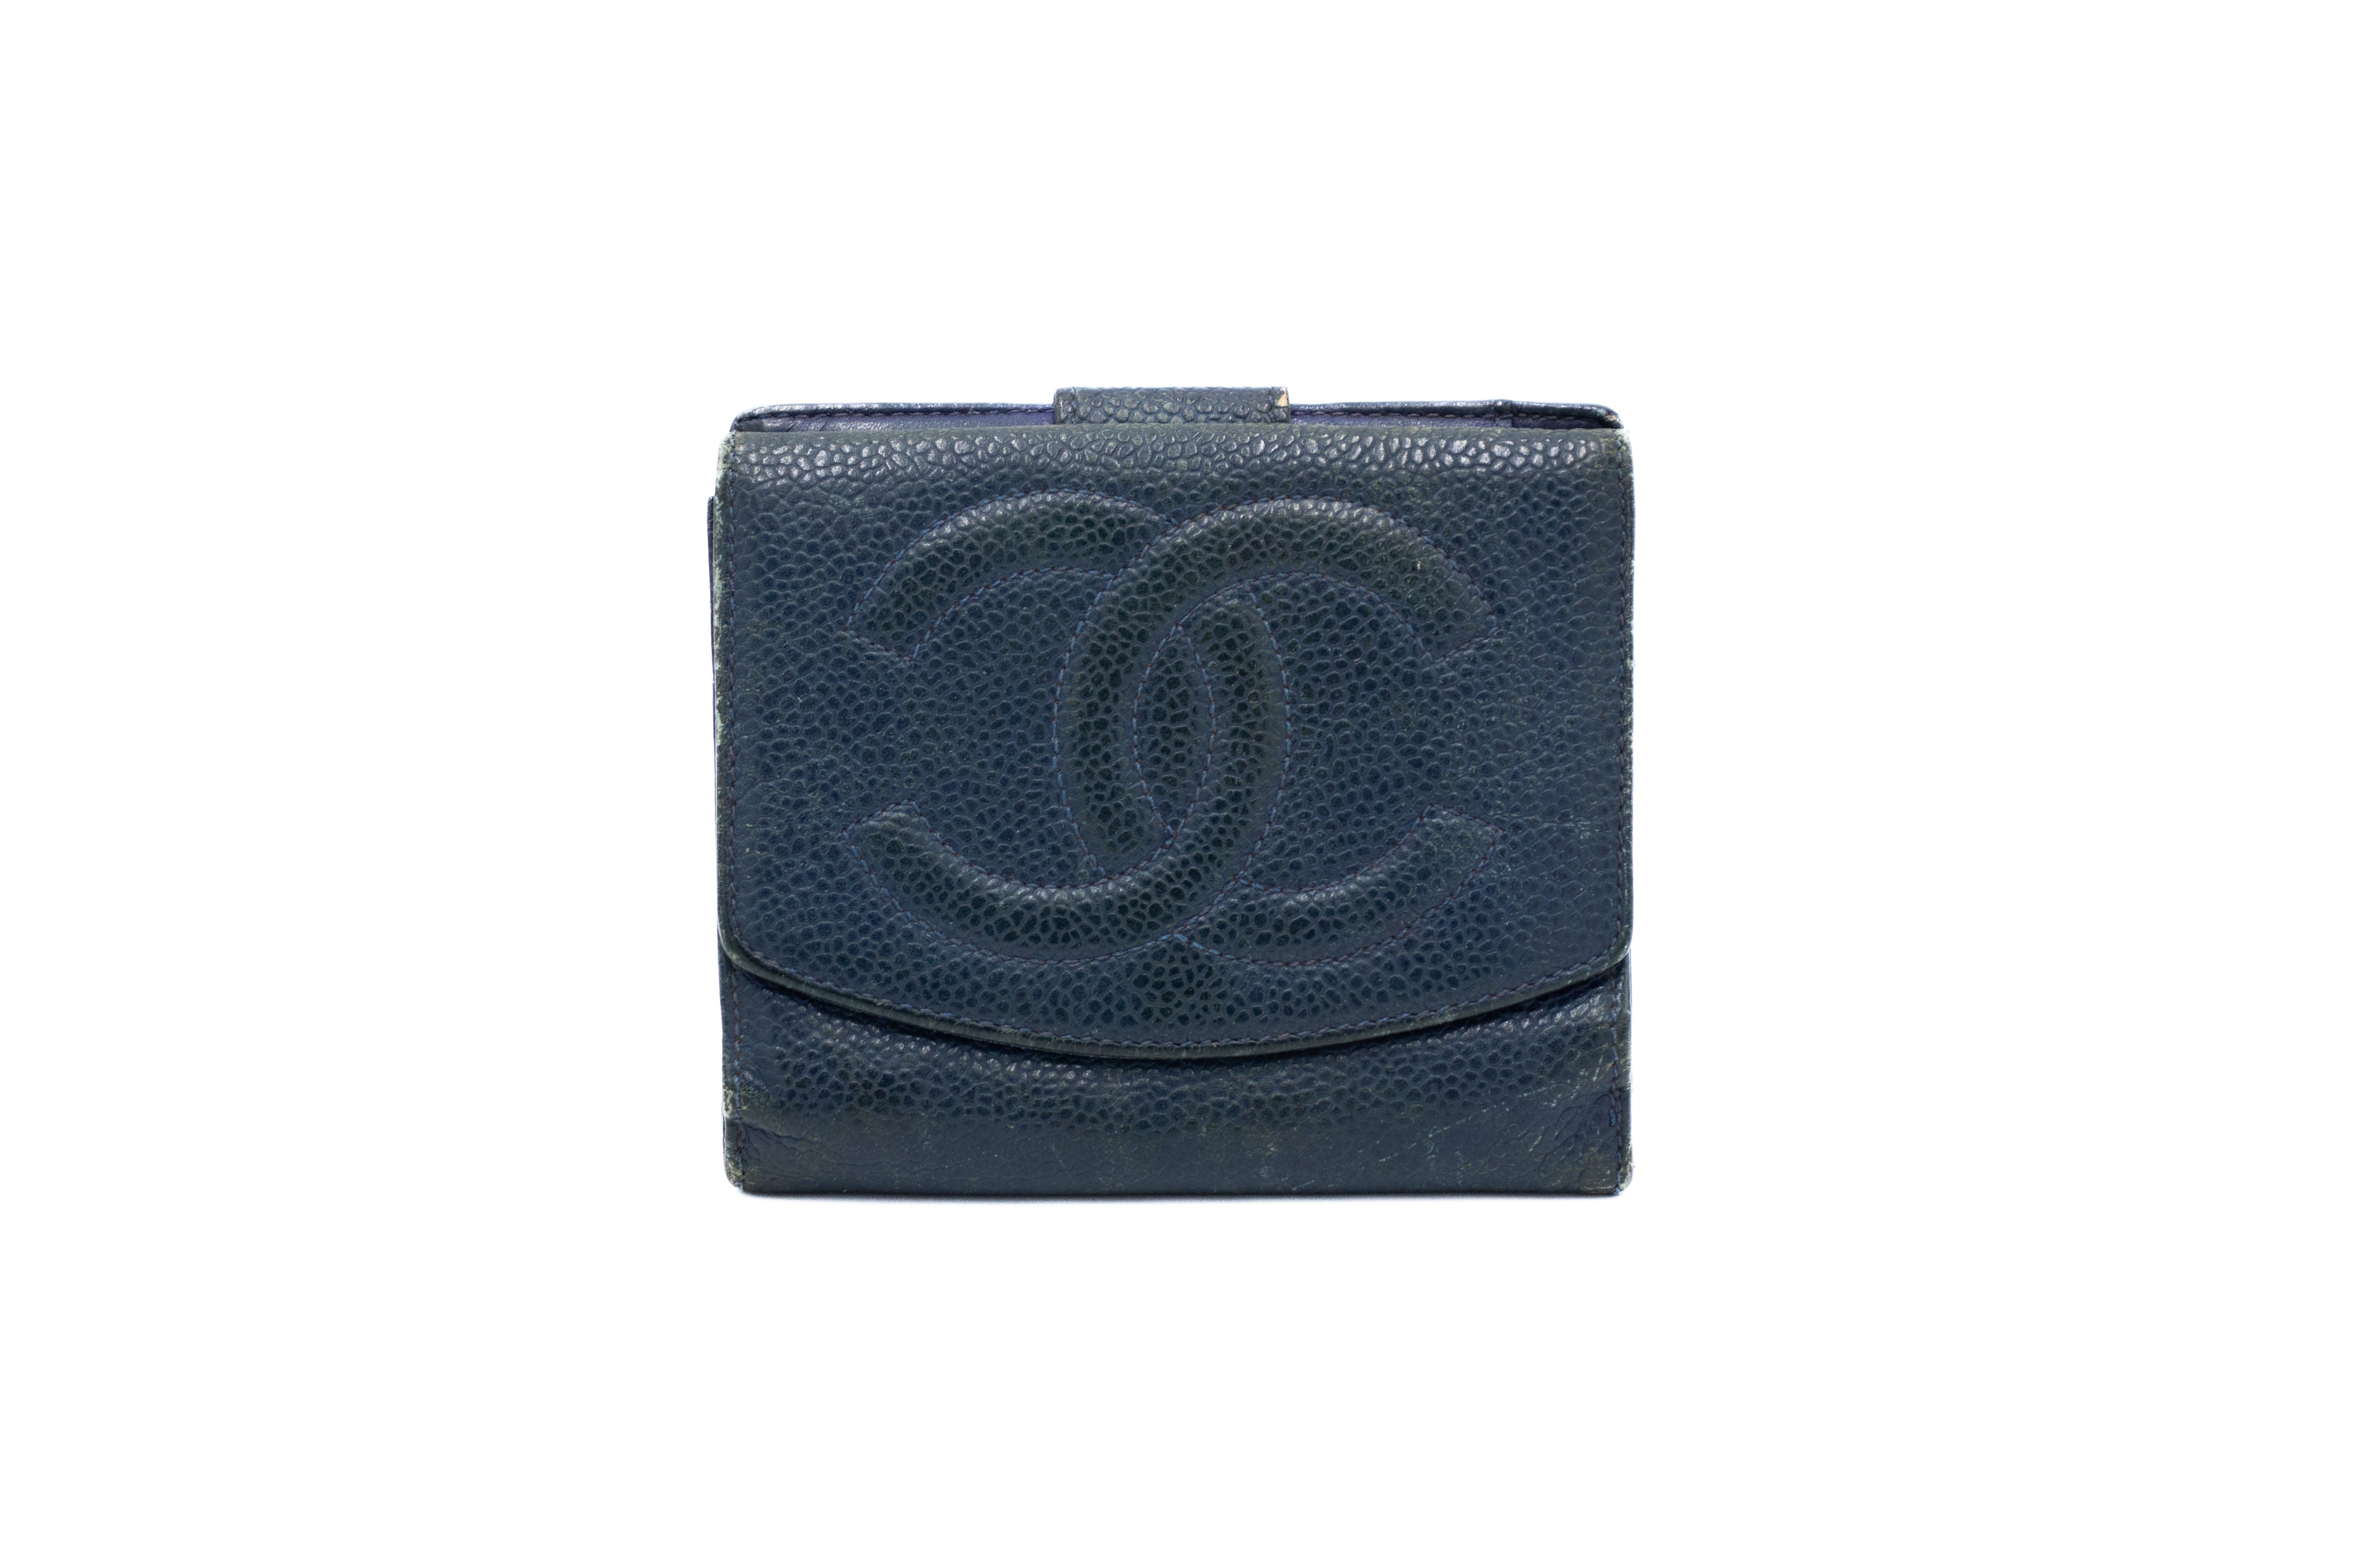 Chanel Leather "CC" Wallet